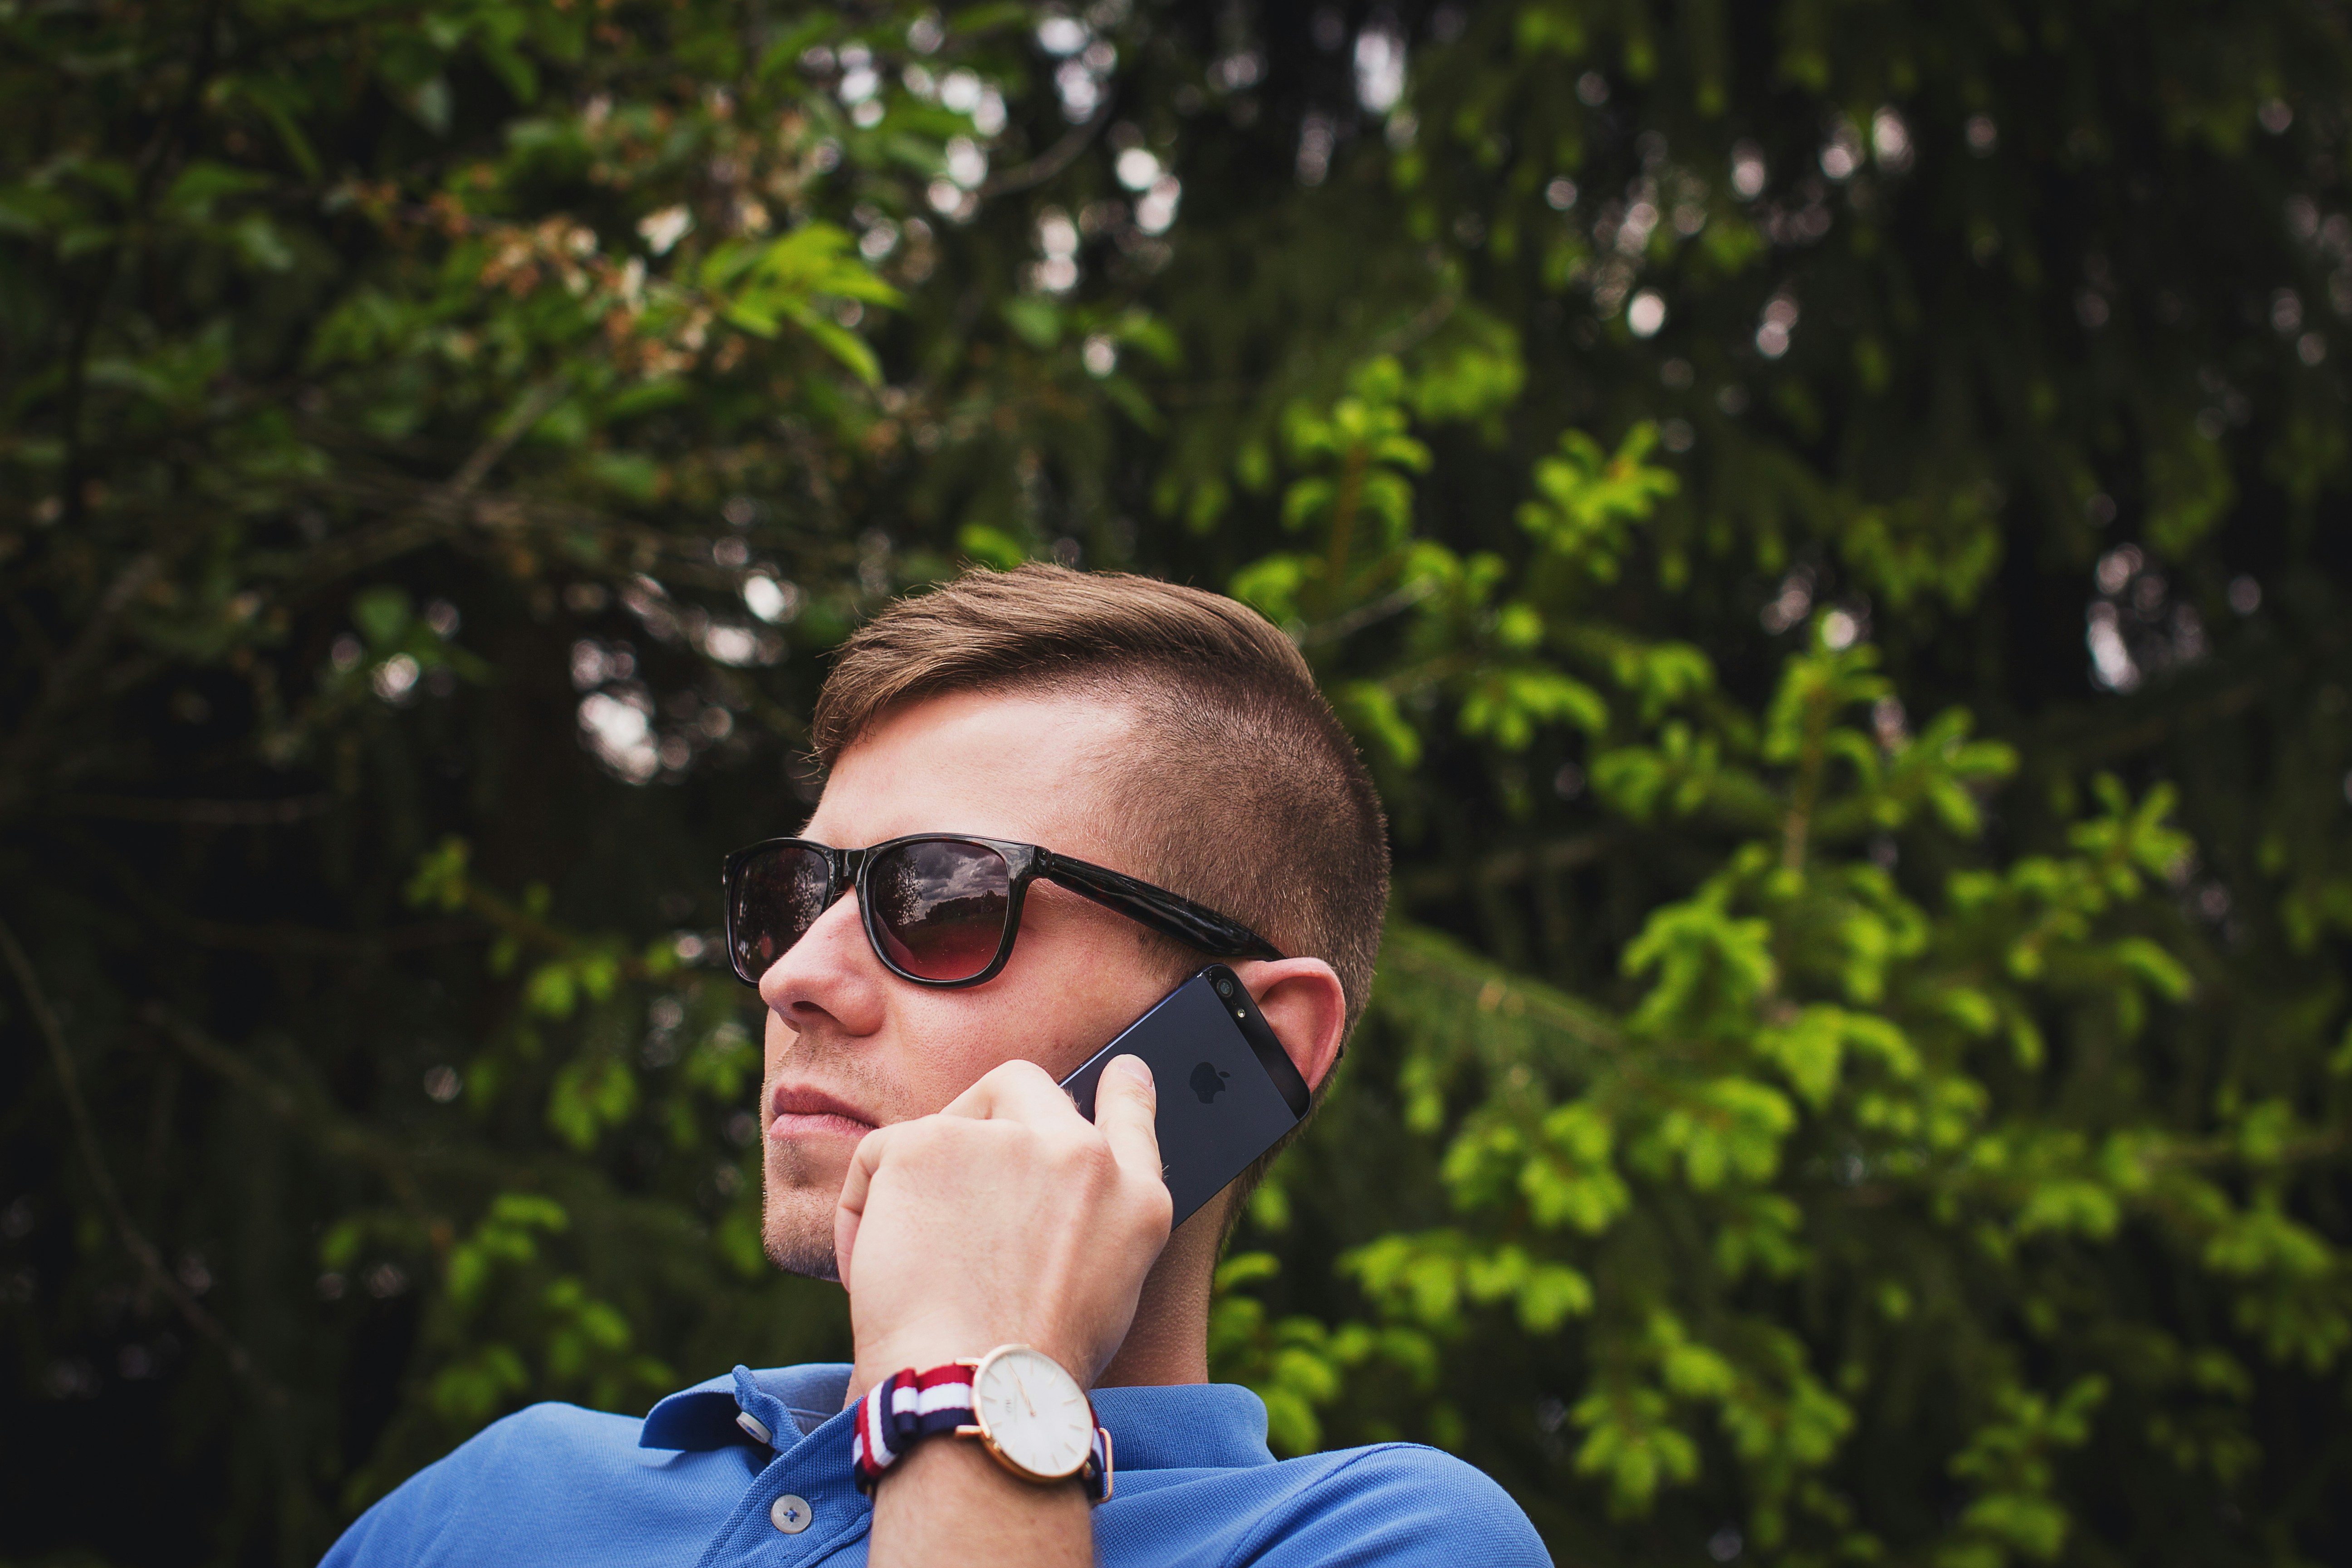 A handsome man on a phone call | Source: Unsplash